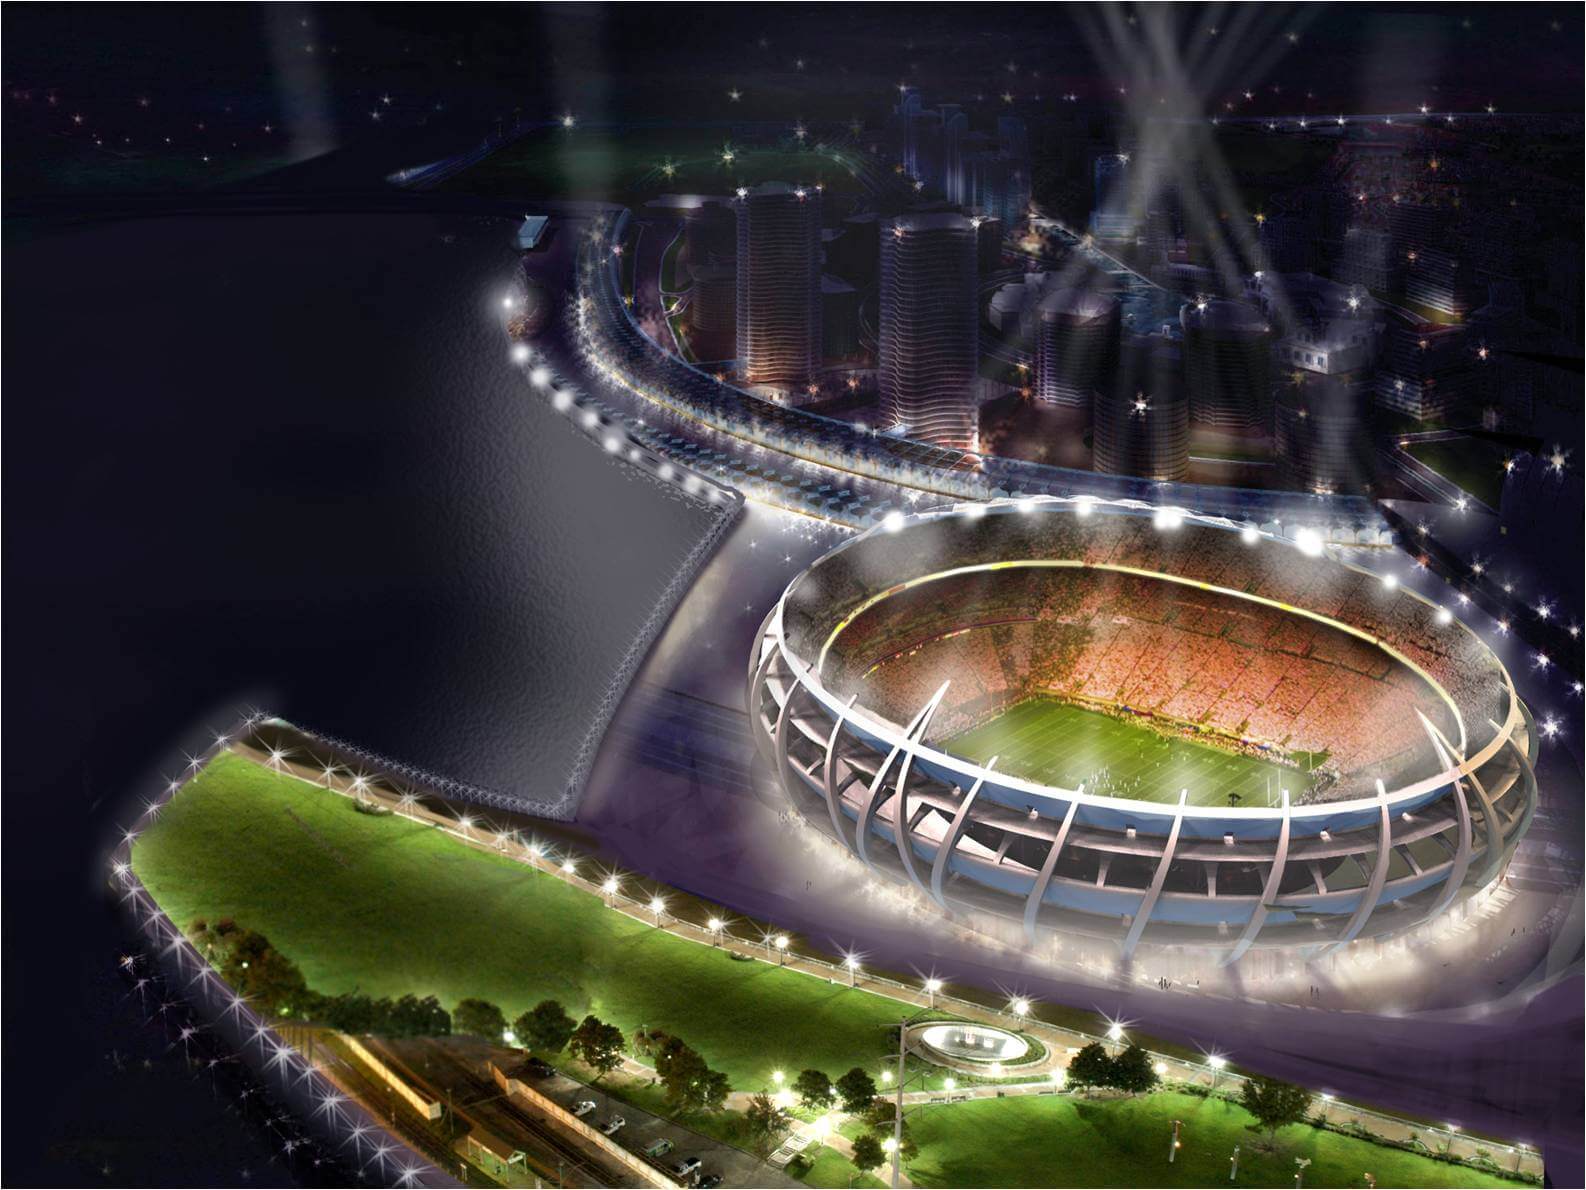 A mock-up of the Colossus stadium design project created with Altair Inspire.